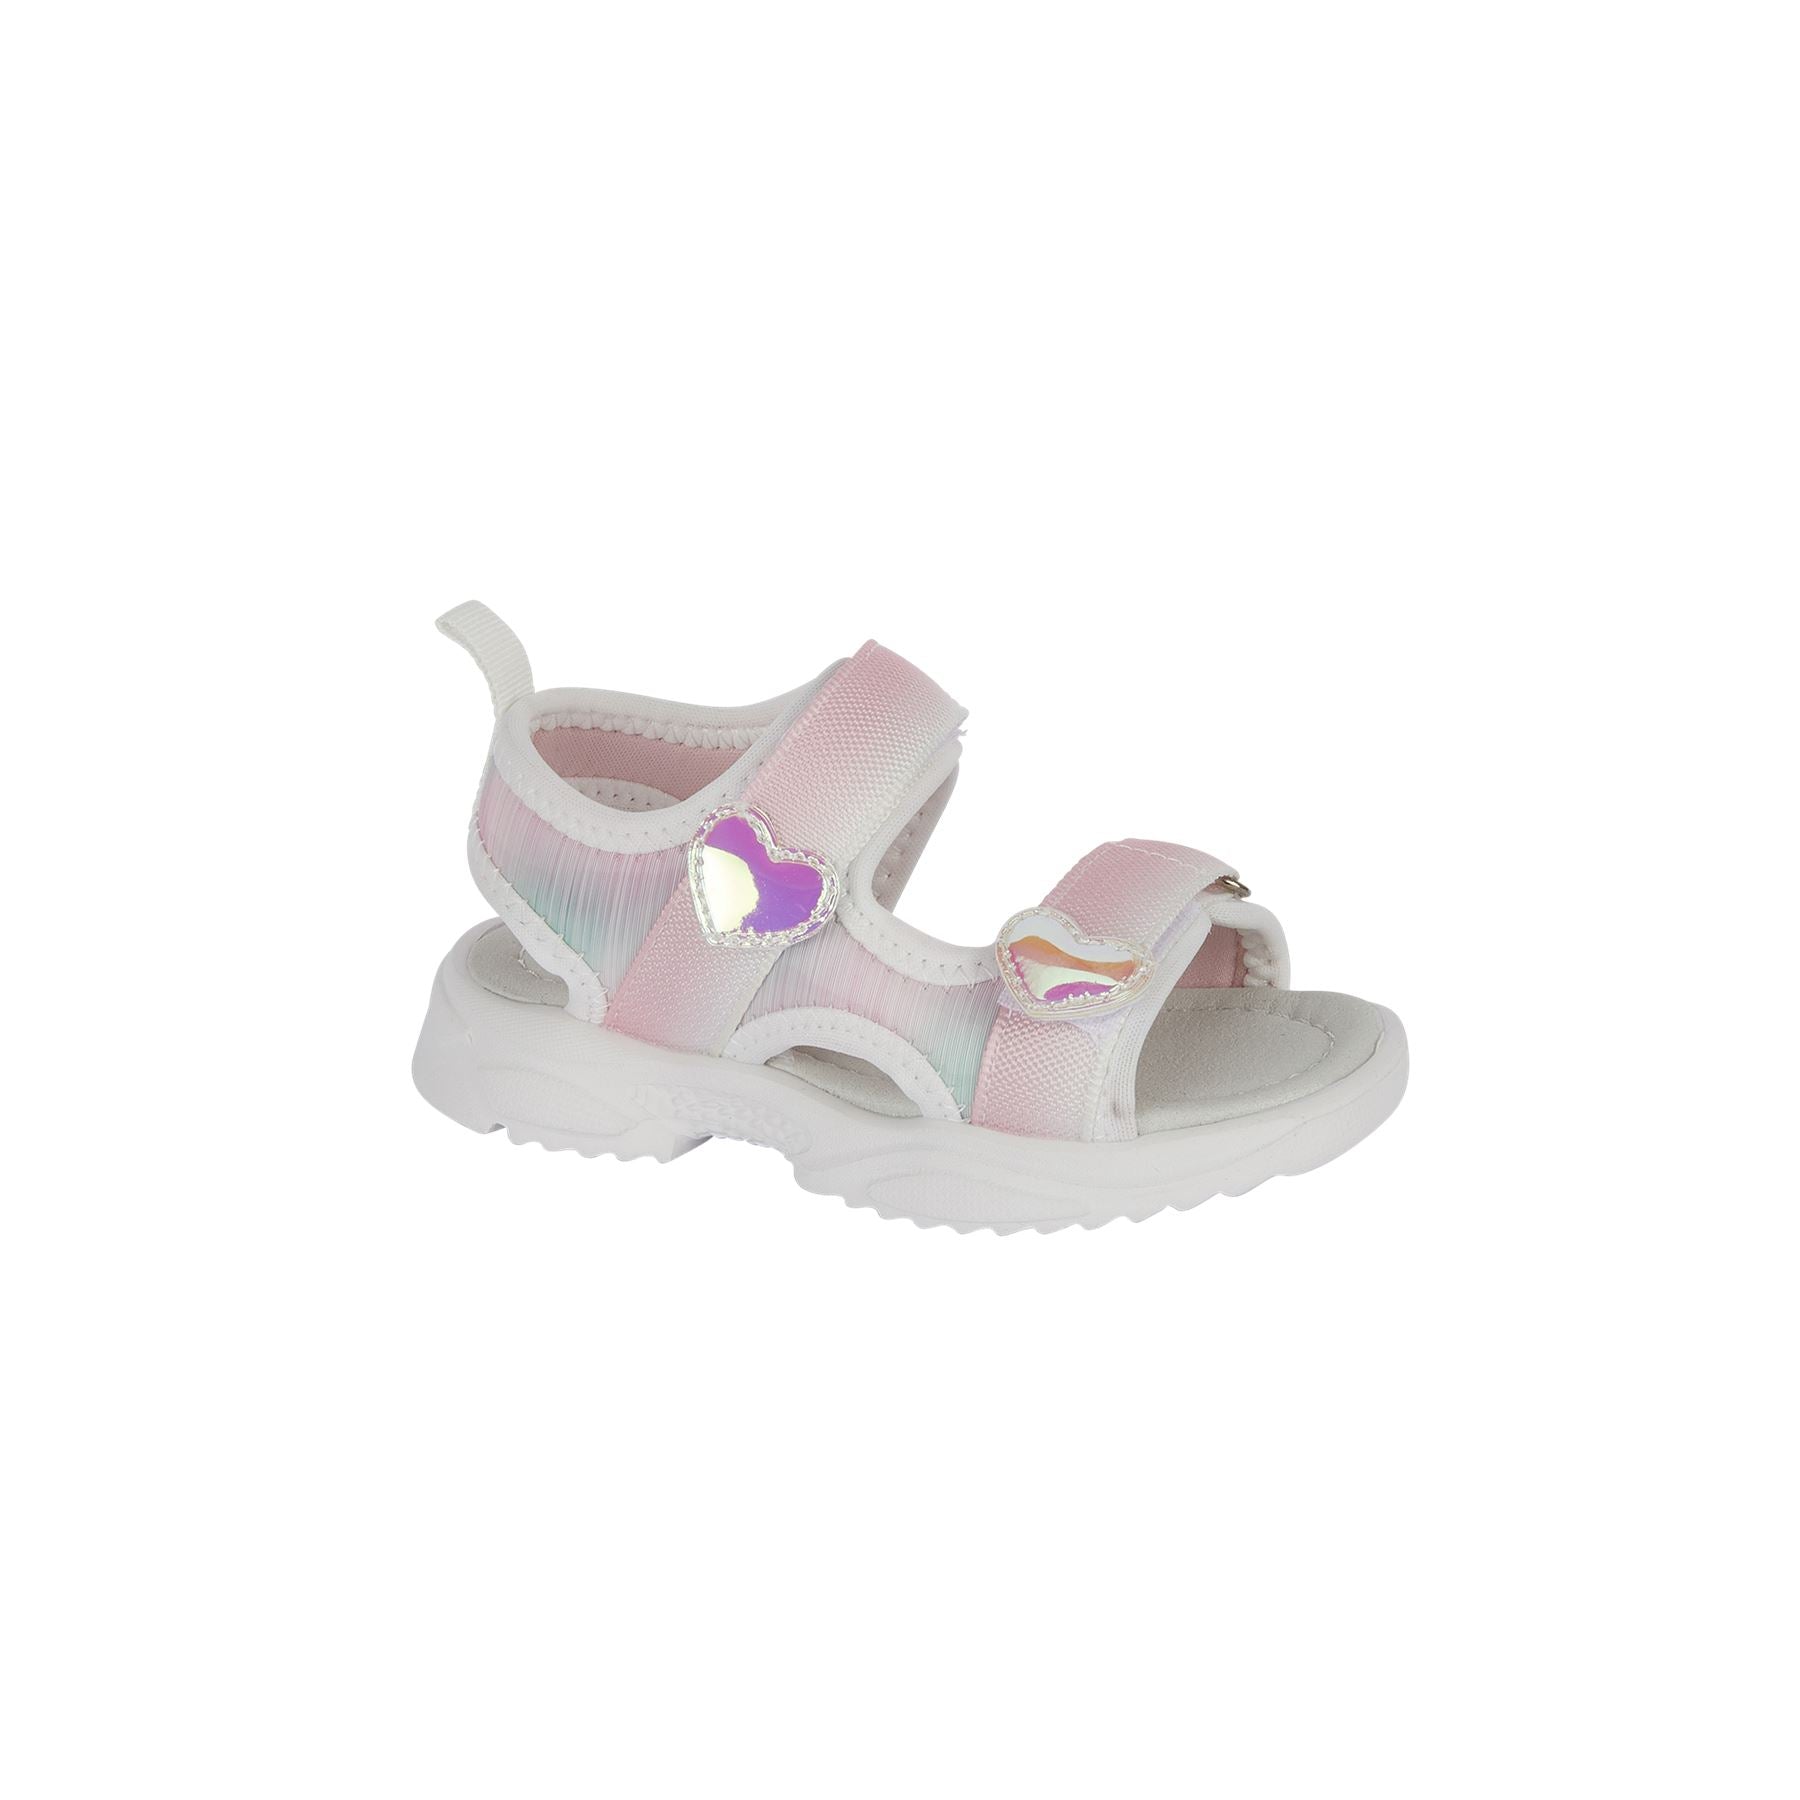 Kids Girls Beach Summer Mule Sandals Open Toe With Touch Close Fastening Strap